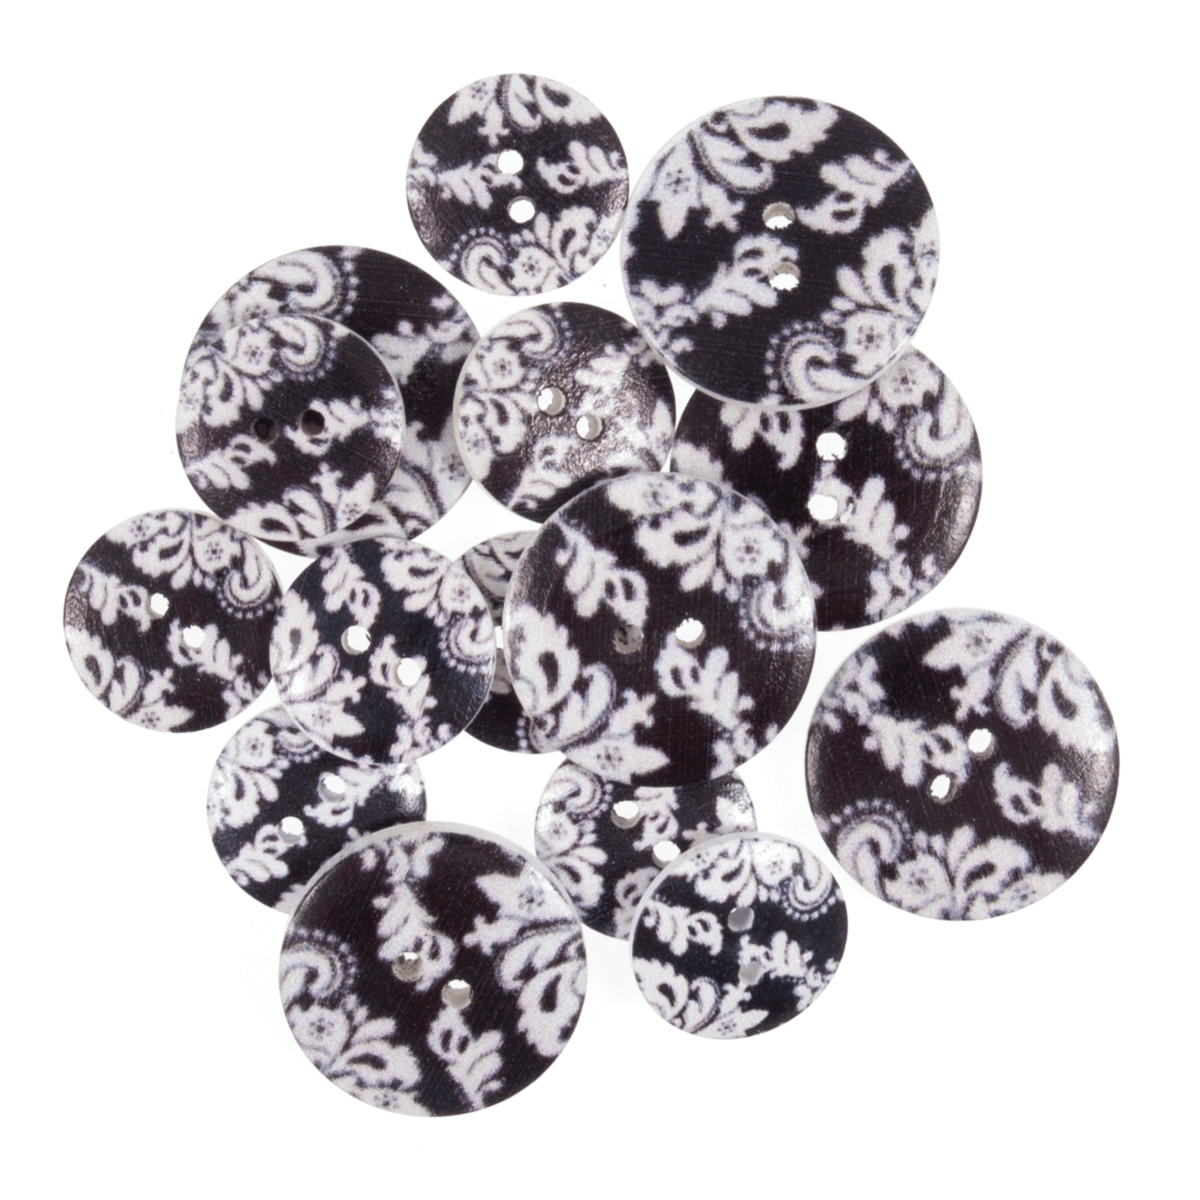 15 x Assorted  Black Floral Paisley Craft Buttons 18mm - 25mm 